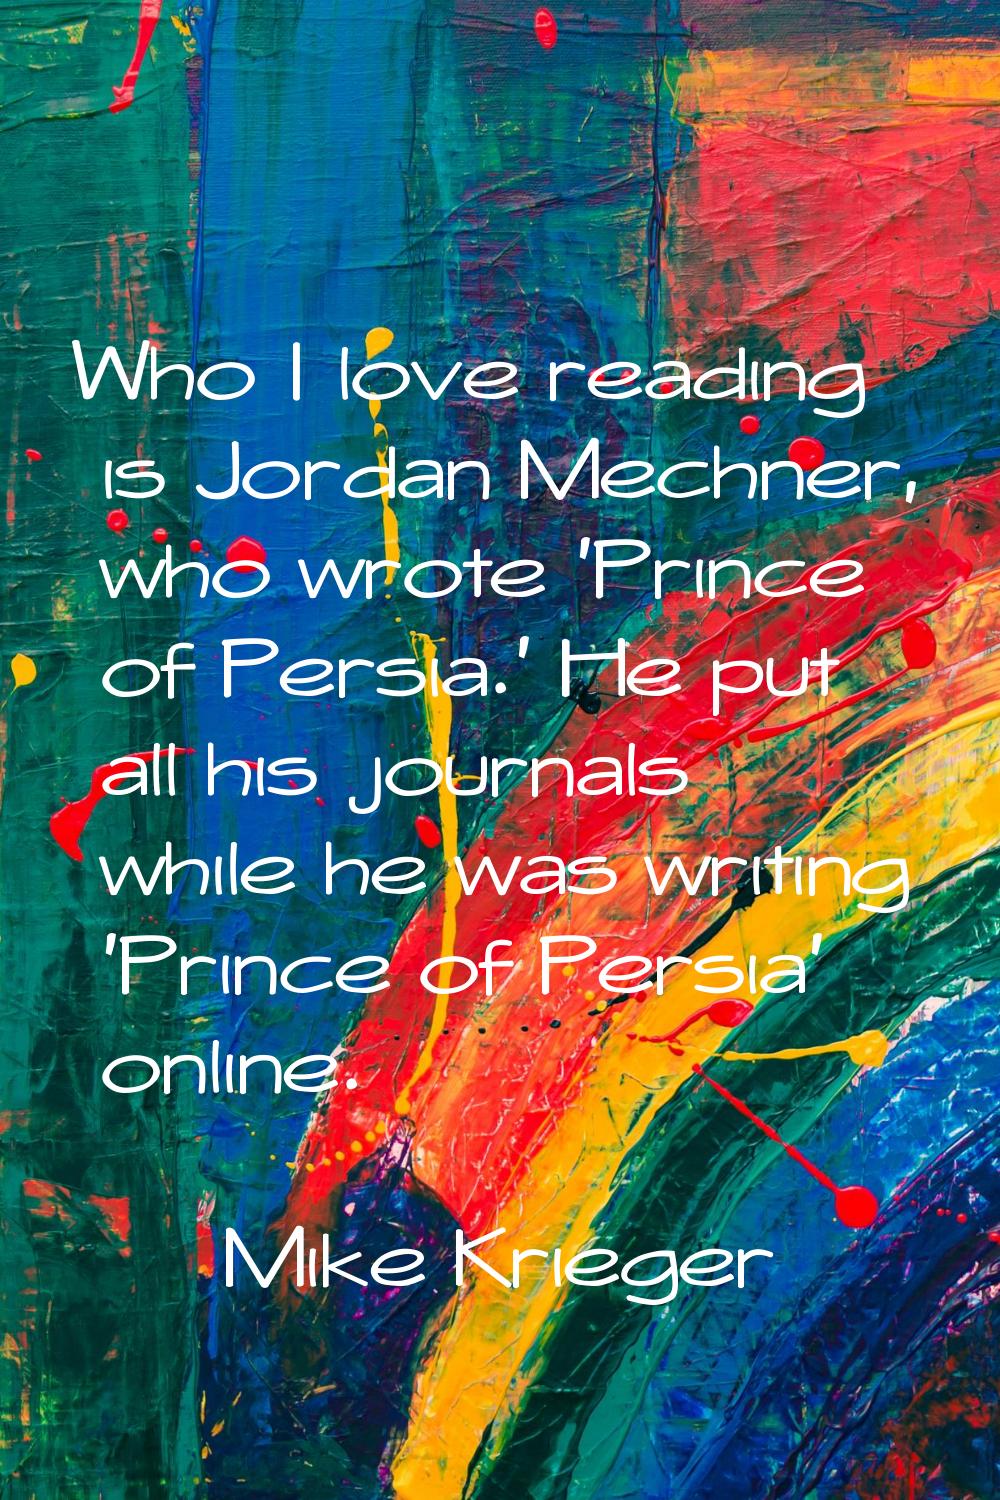 Who I love reading is Jordan Mechner, who wrote 'Prince of Persia.' He put all his journals while h